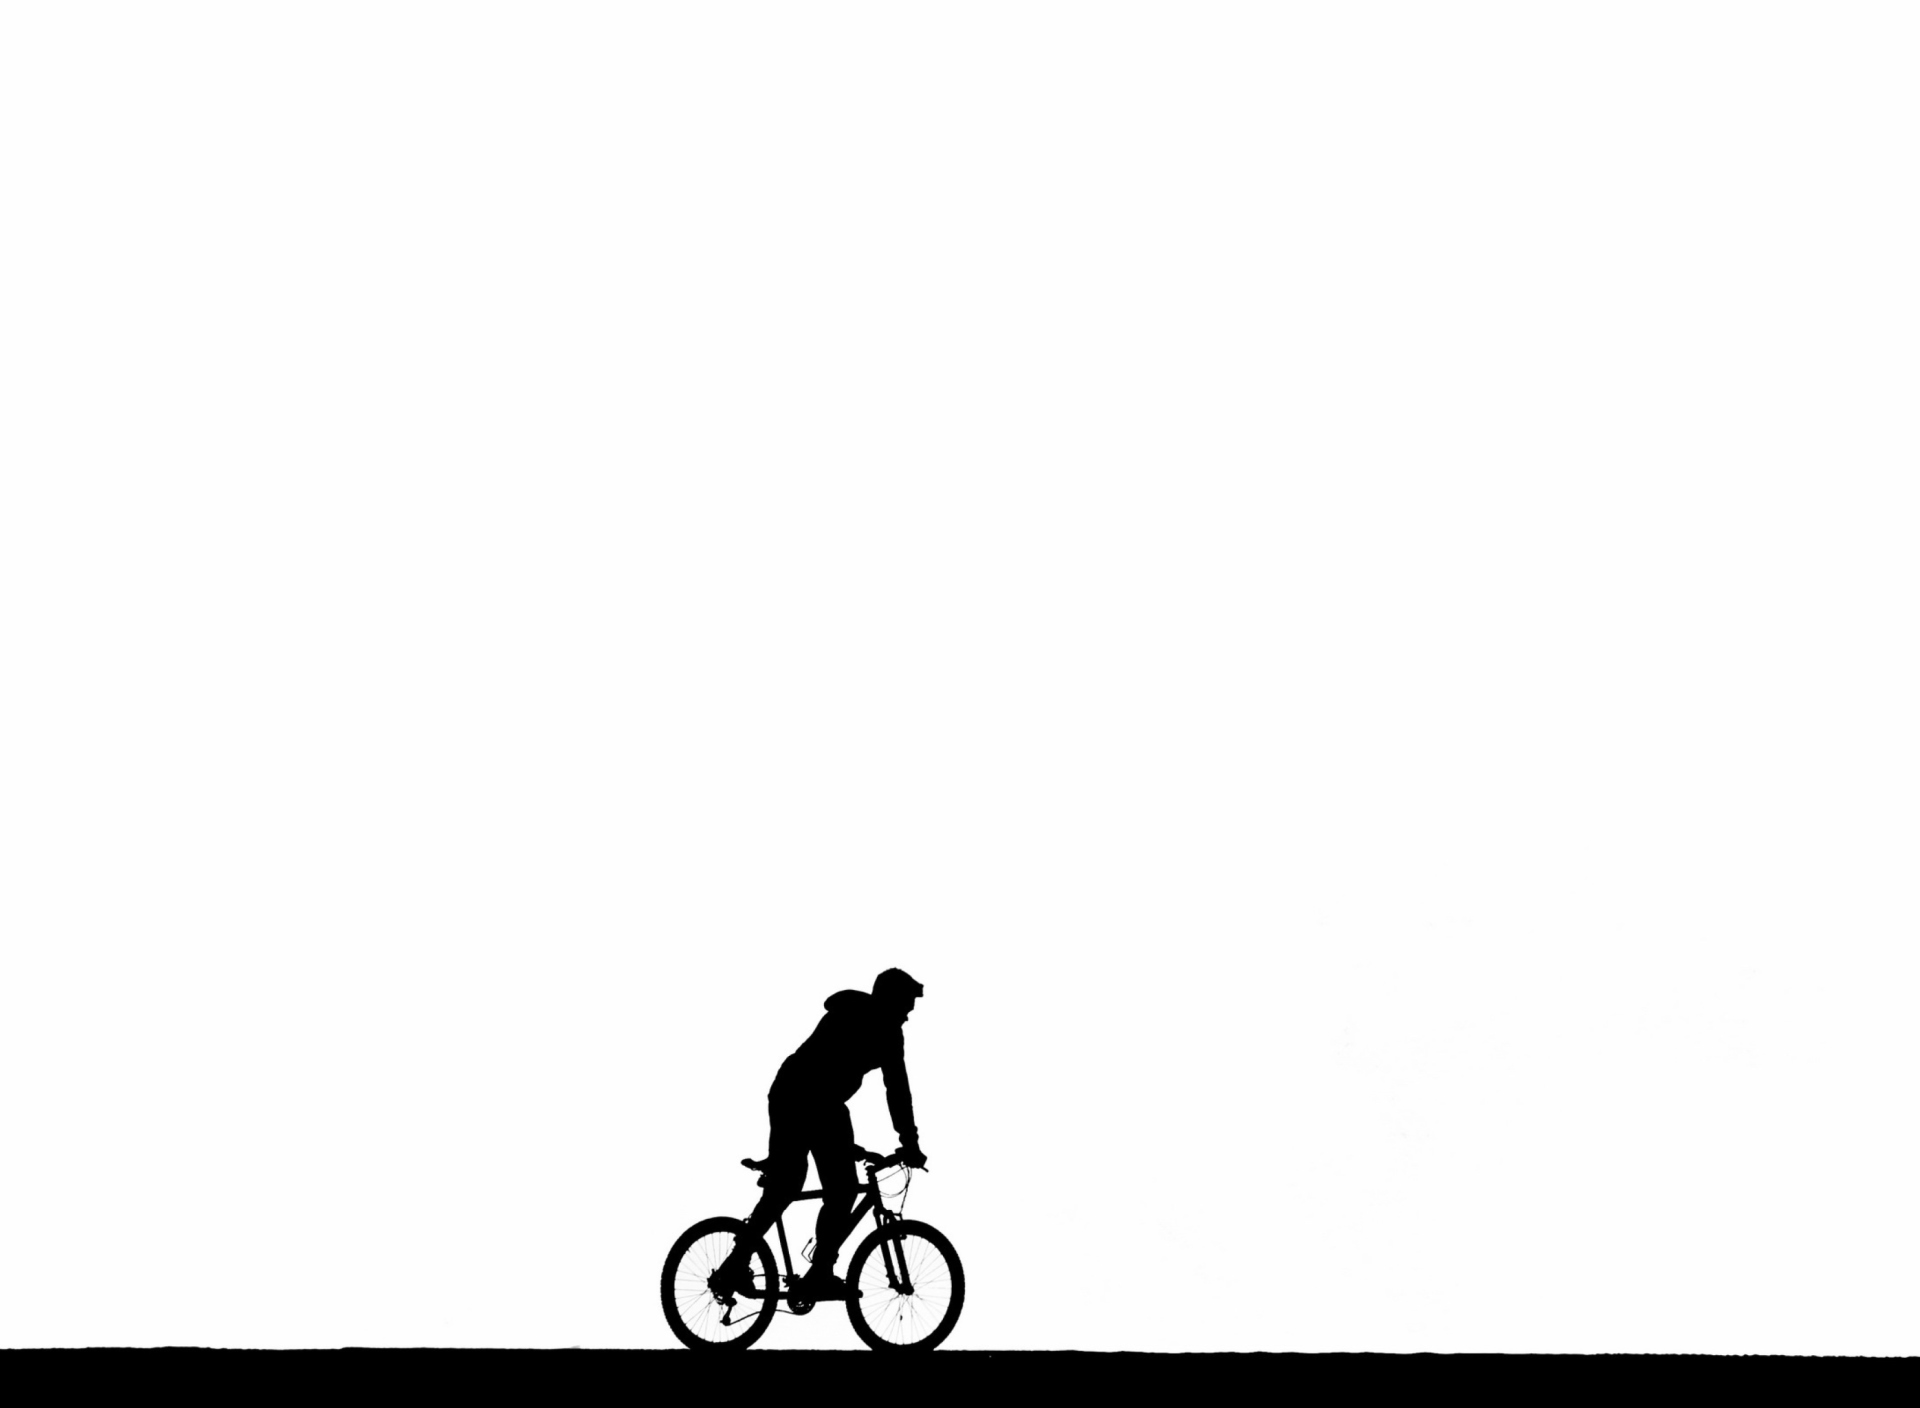 Bicycle Silhouette wallpaper 1920x1408